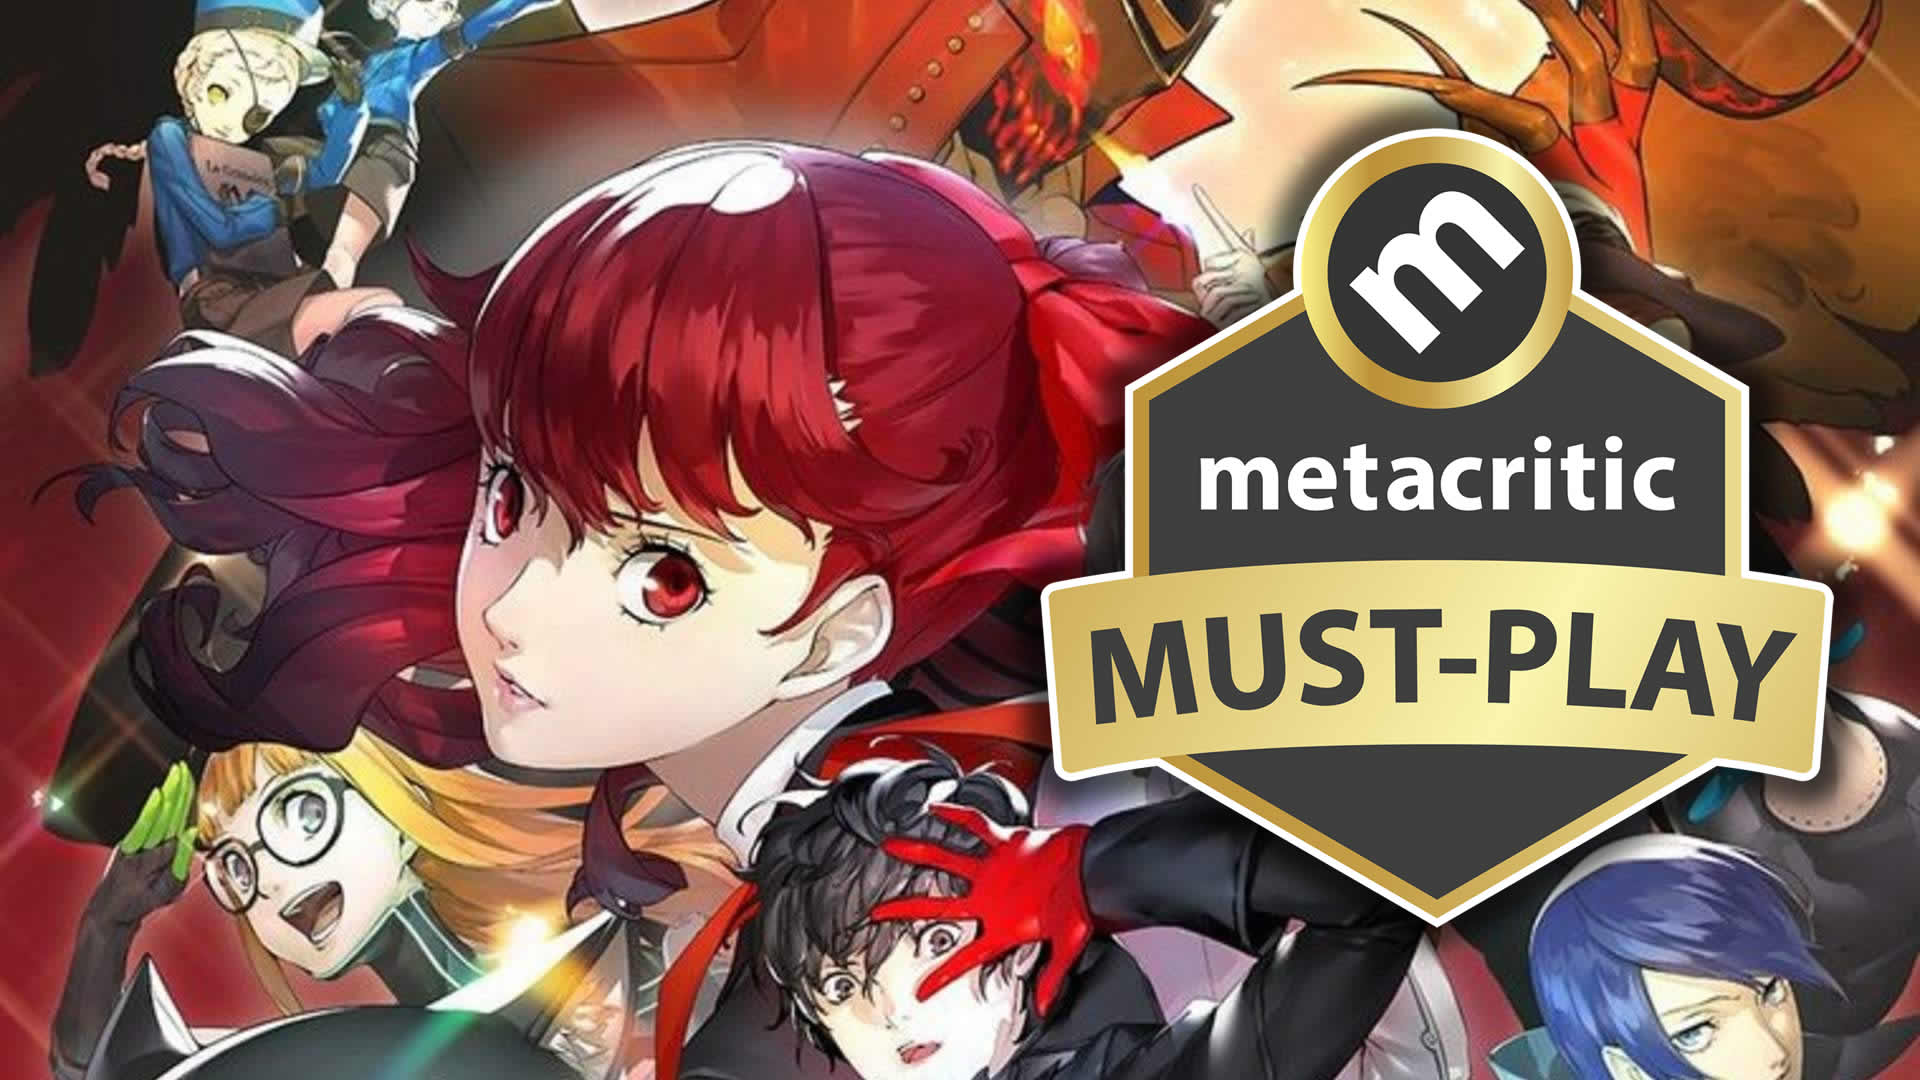 The Best RPGs Of This Generation, According To Metacritic